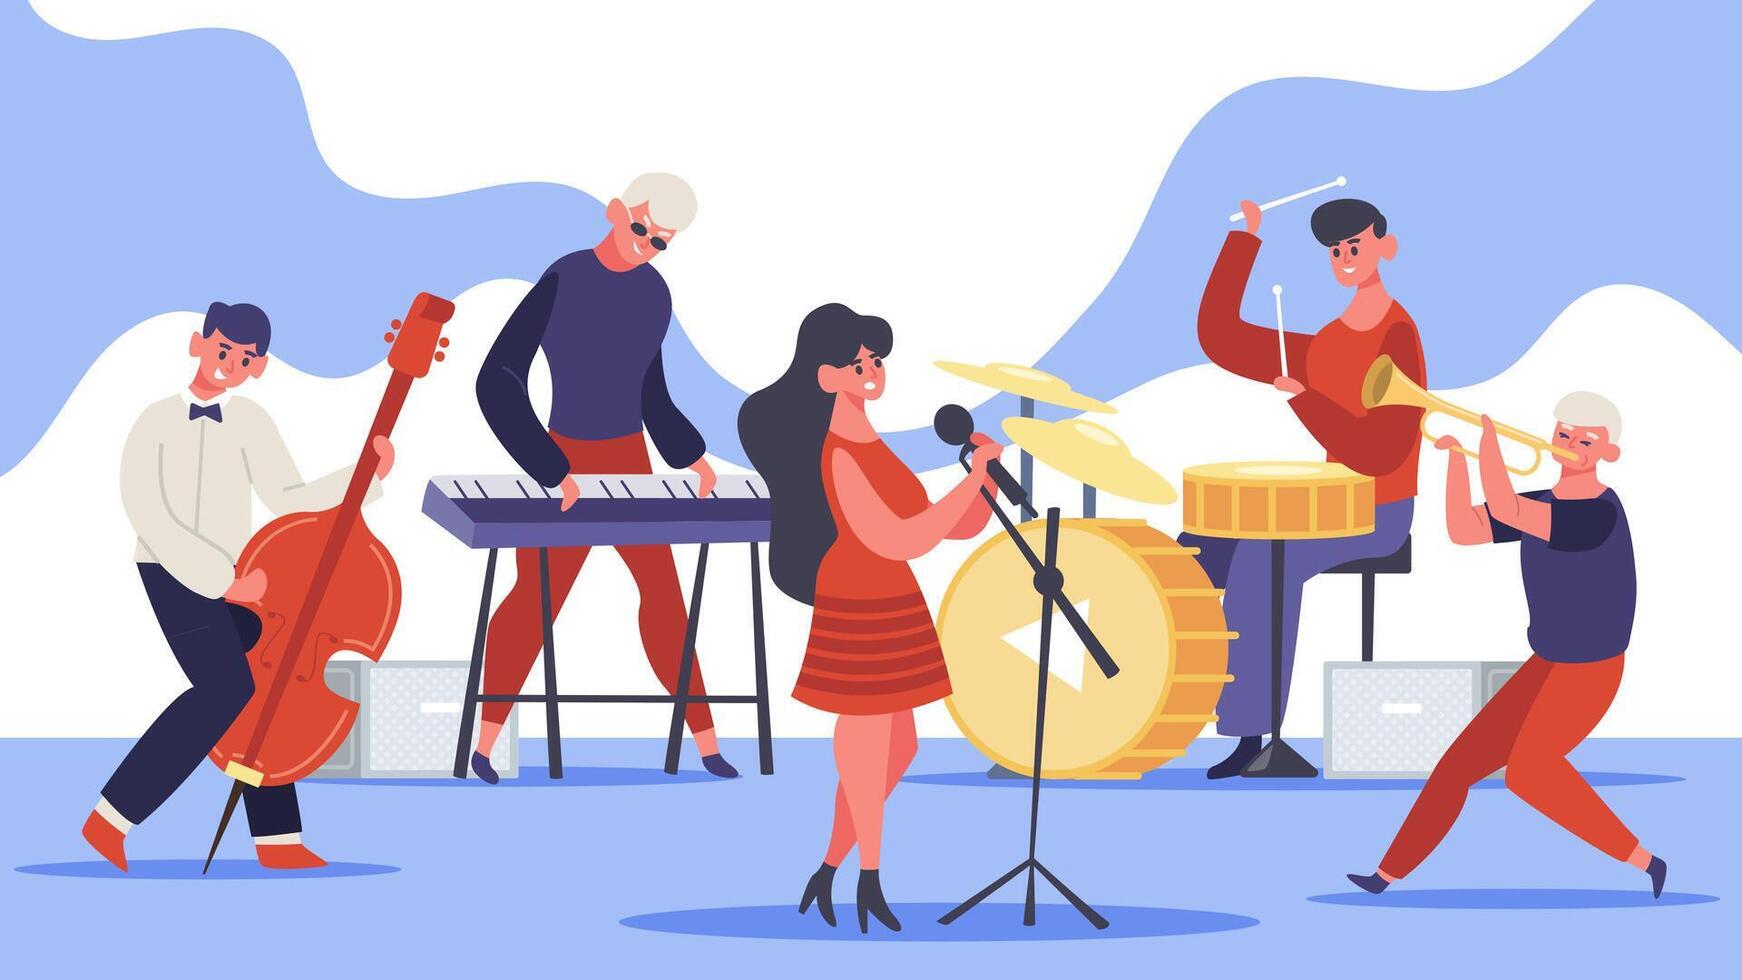 Jazz band concert. Music band musicians singing and playing guitar and drums and bass, modern jazz team. Rock band performance vector illustration